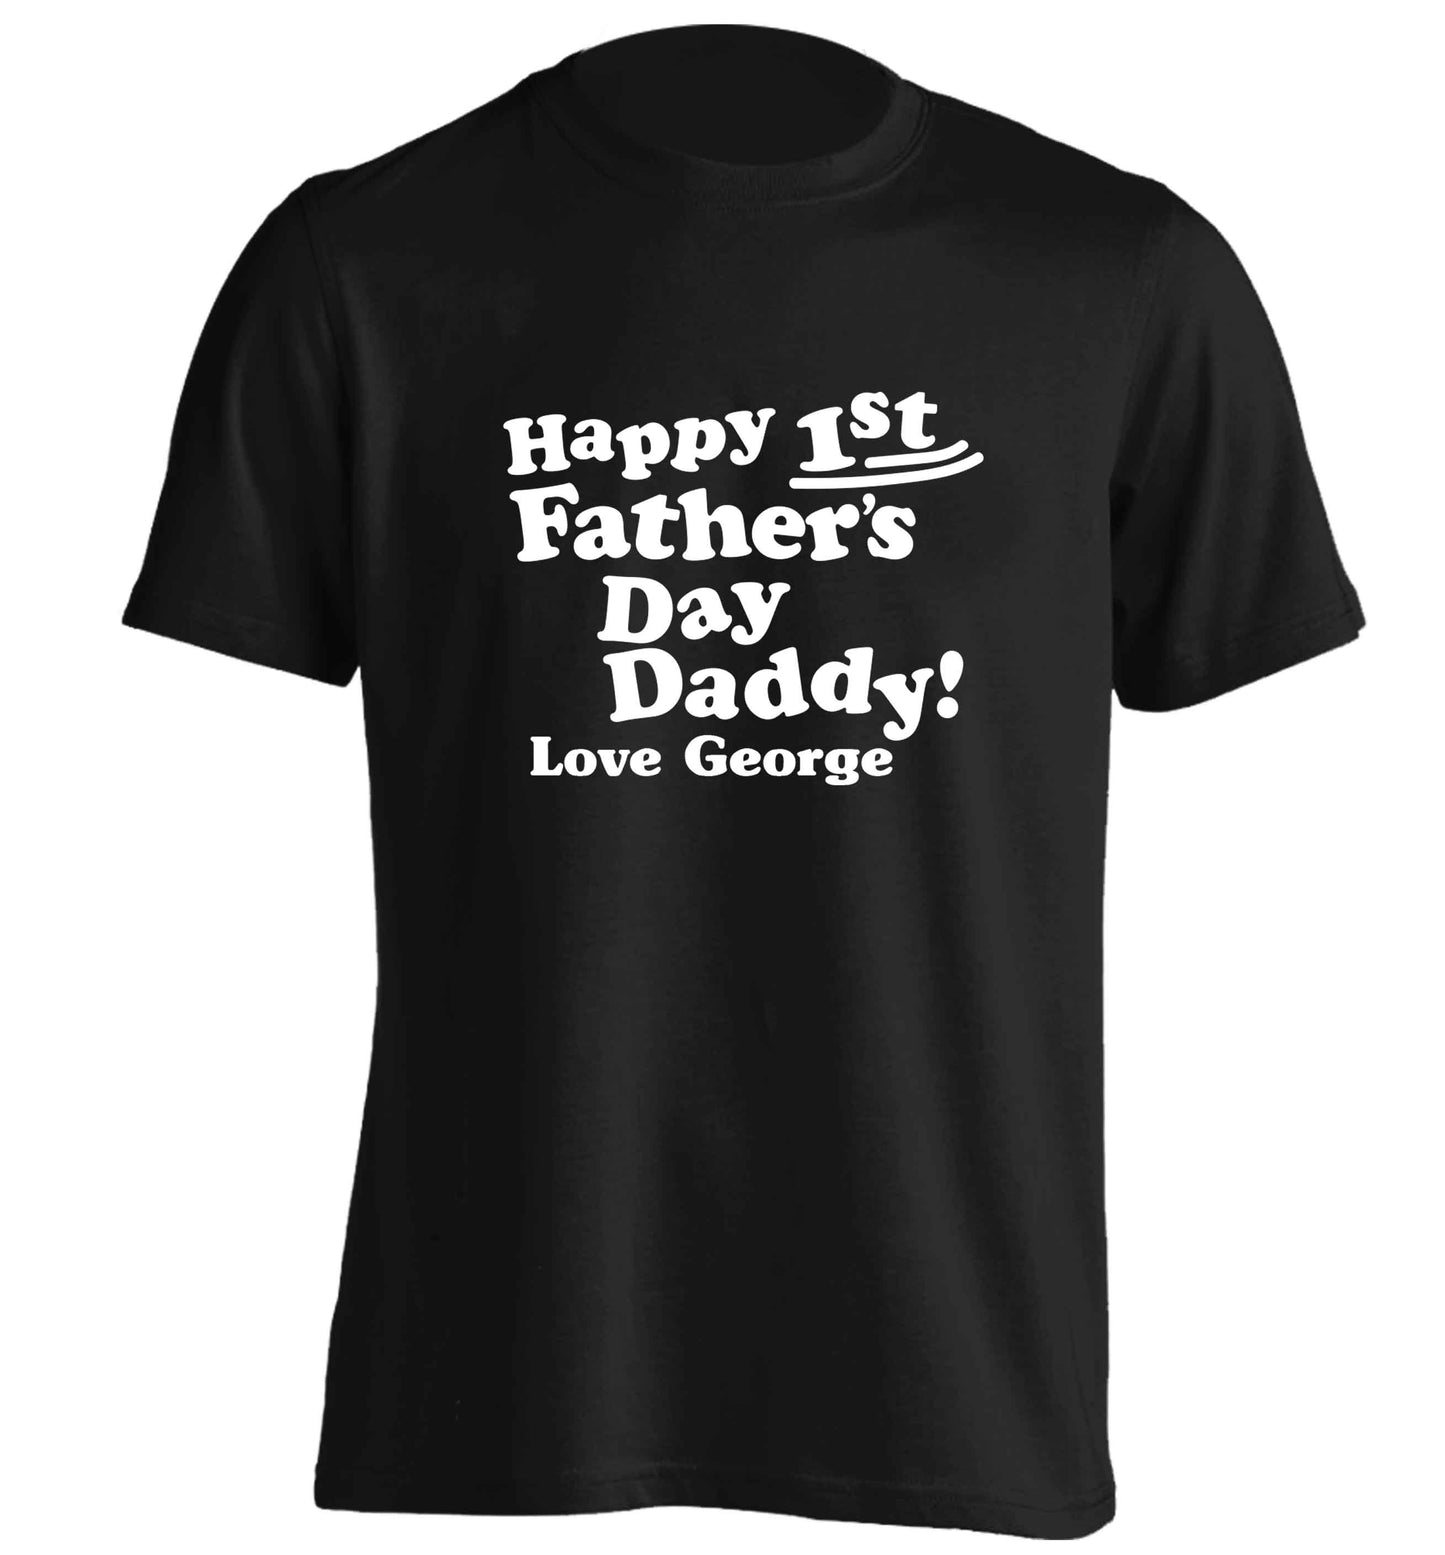 Happy first Fathers Day daddy love personalised adults unisex black Tshirt 2XL